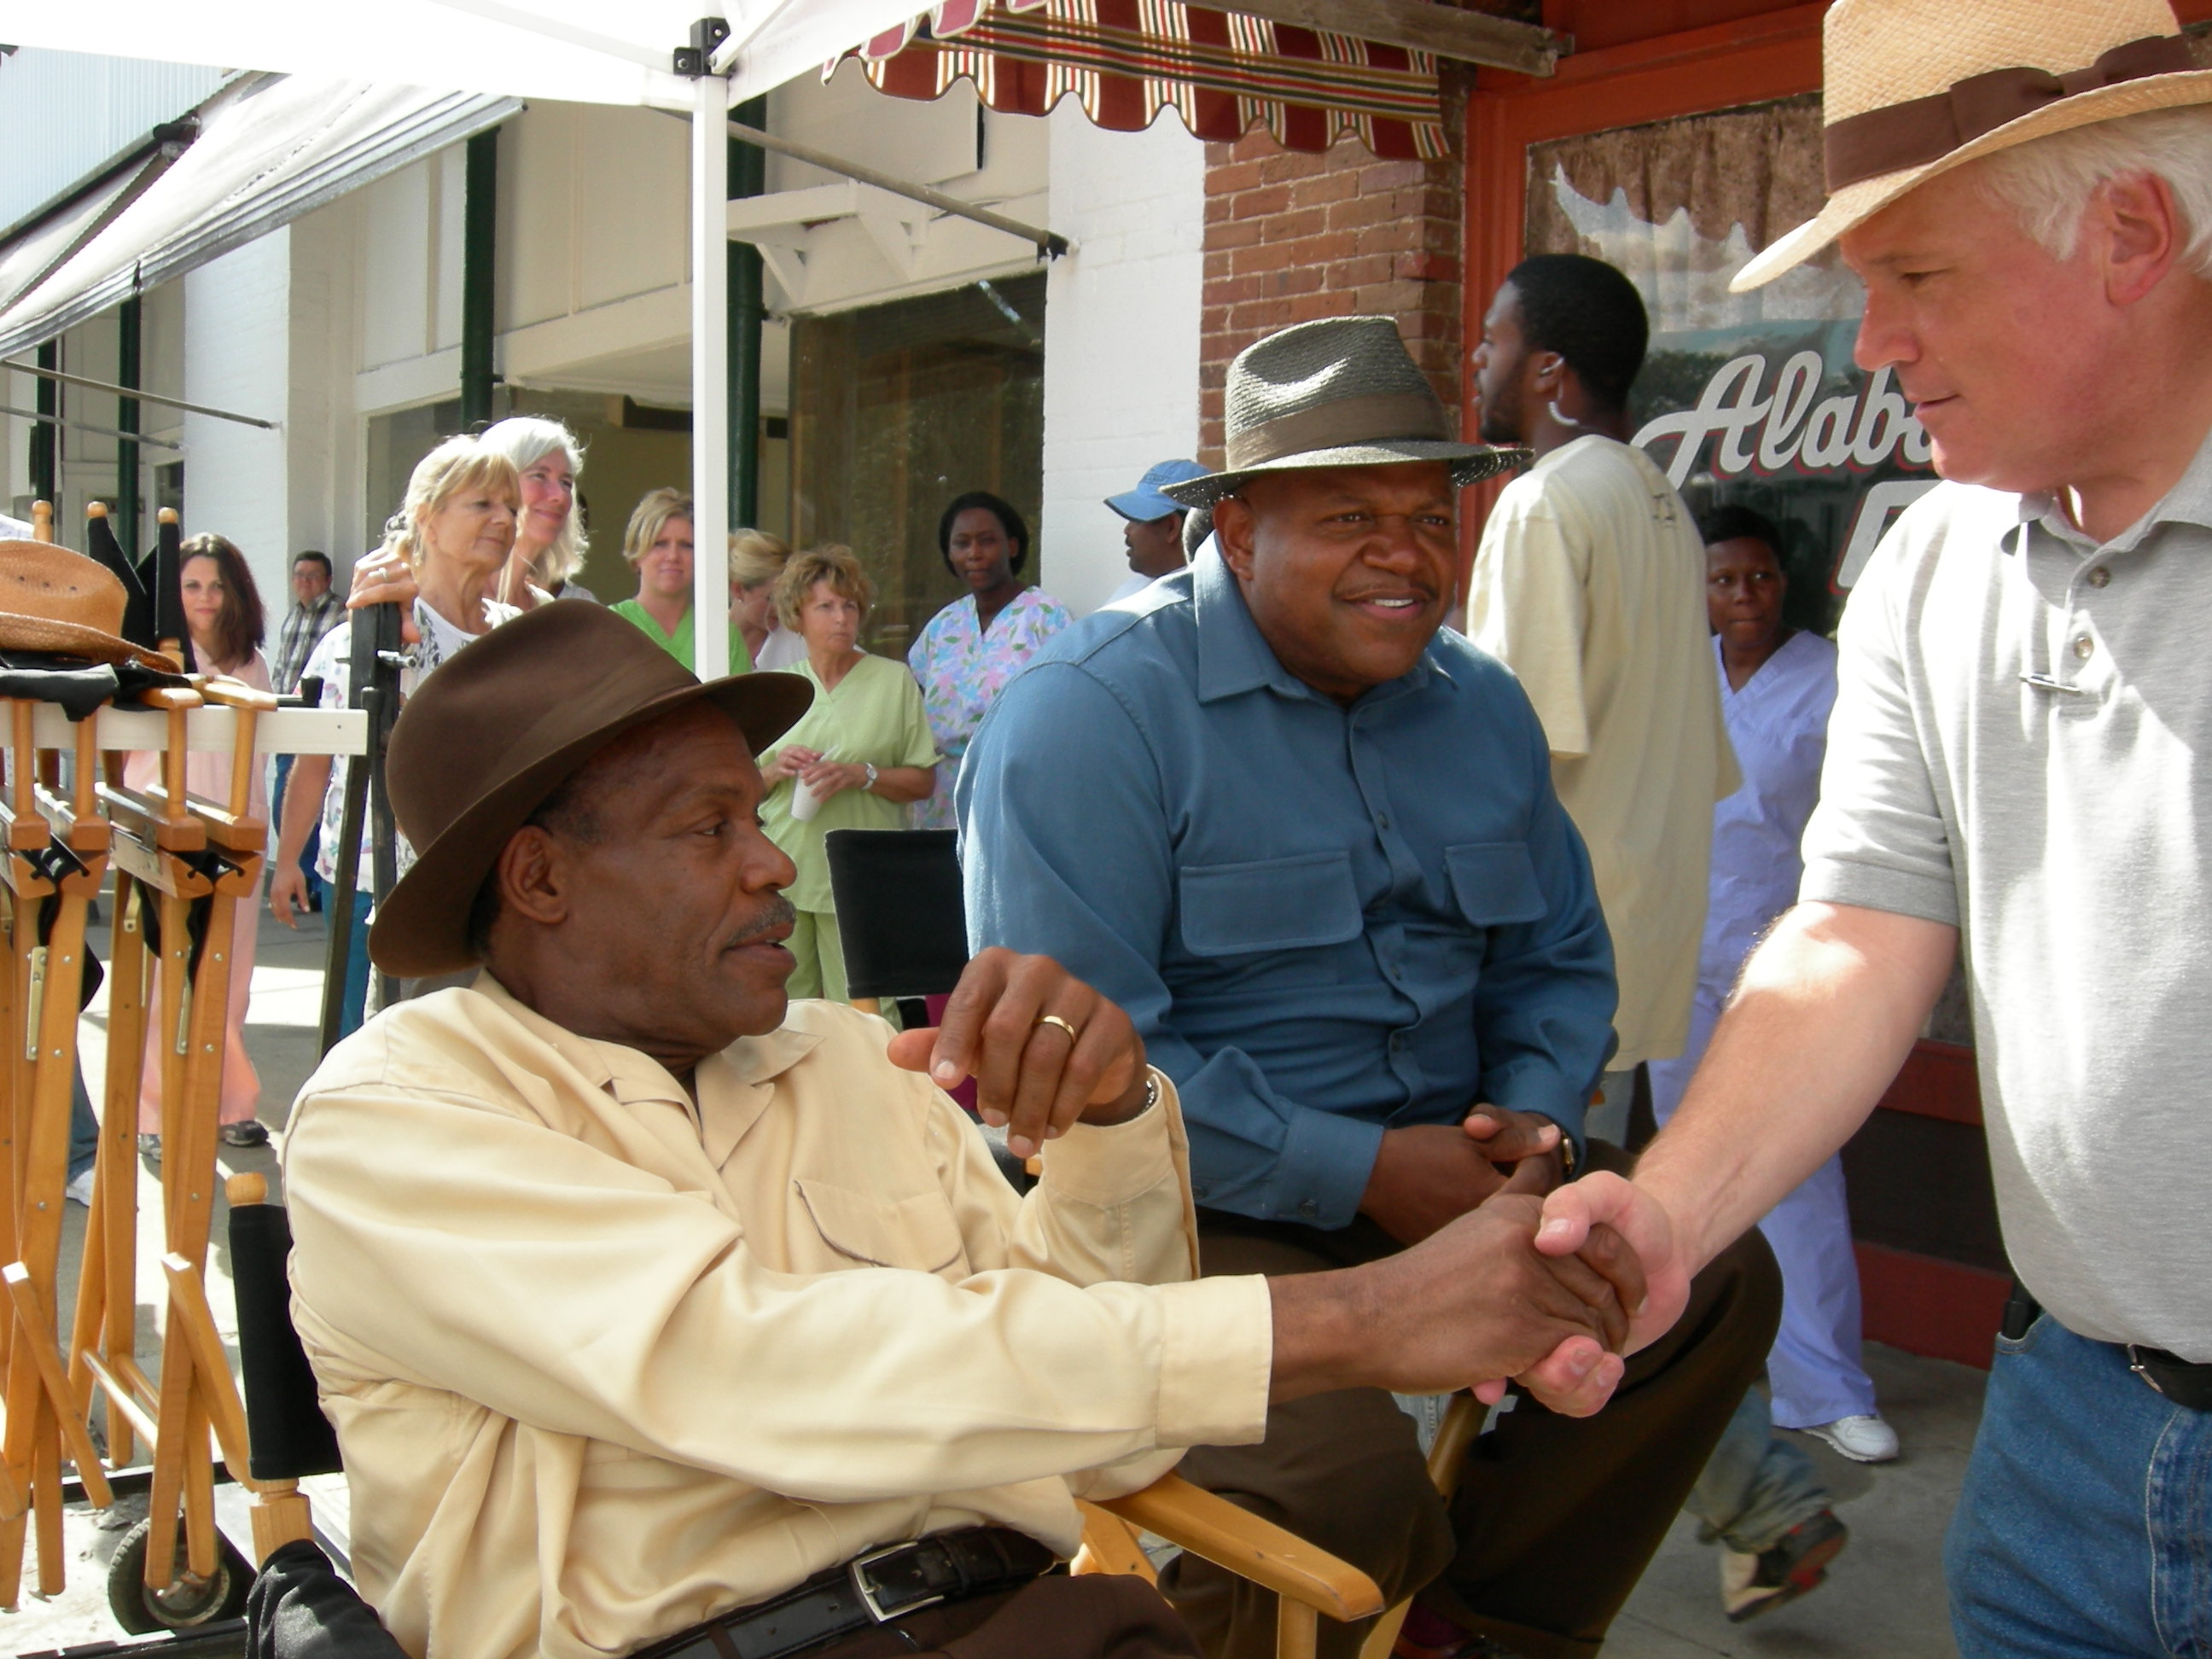 On Location. Honeydripper. 2006. Key tallent often takes note of RTMS efforts to create safe working conditions. Danny Glove and Keb Mo visit with Art after a long hot day of production work.